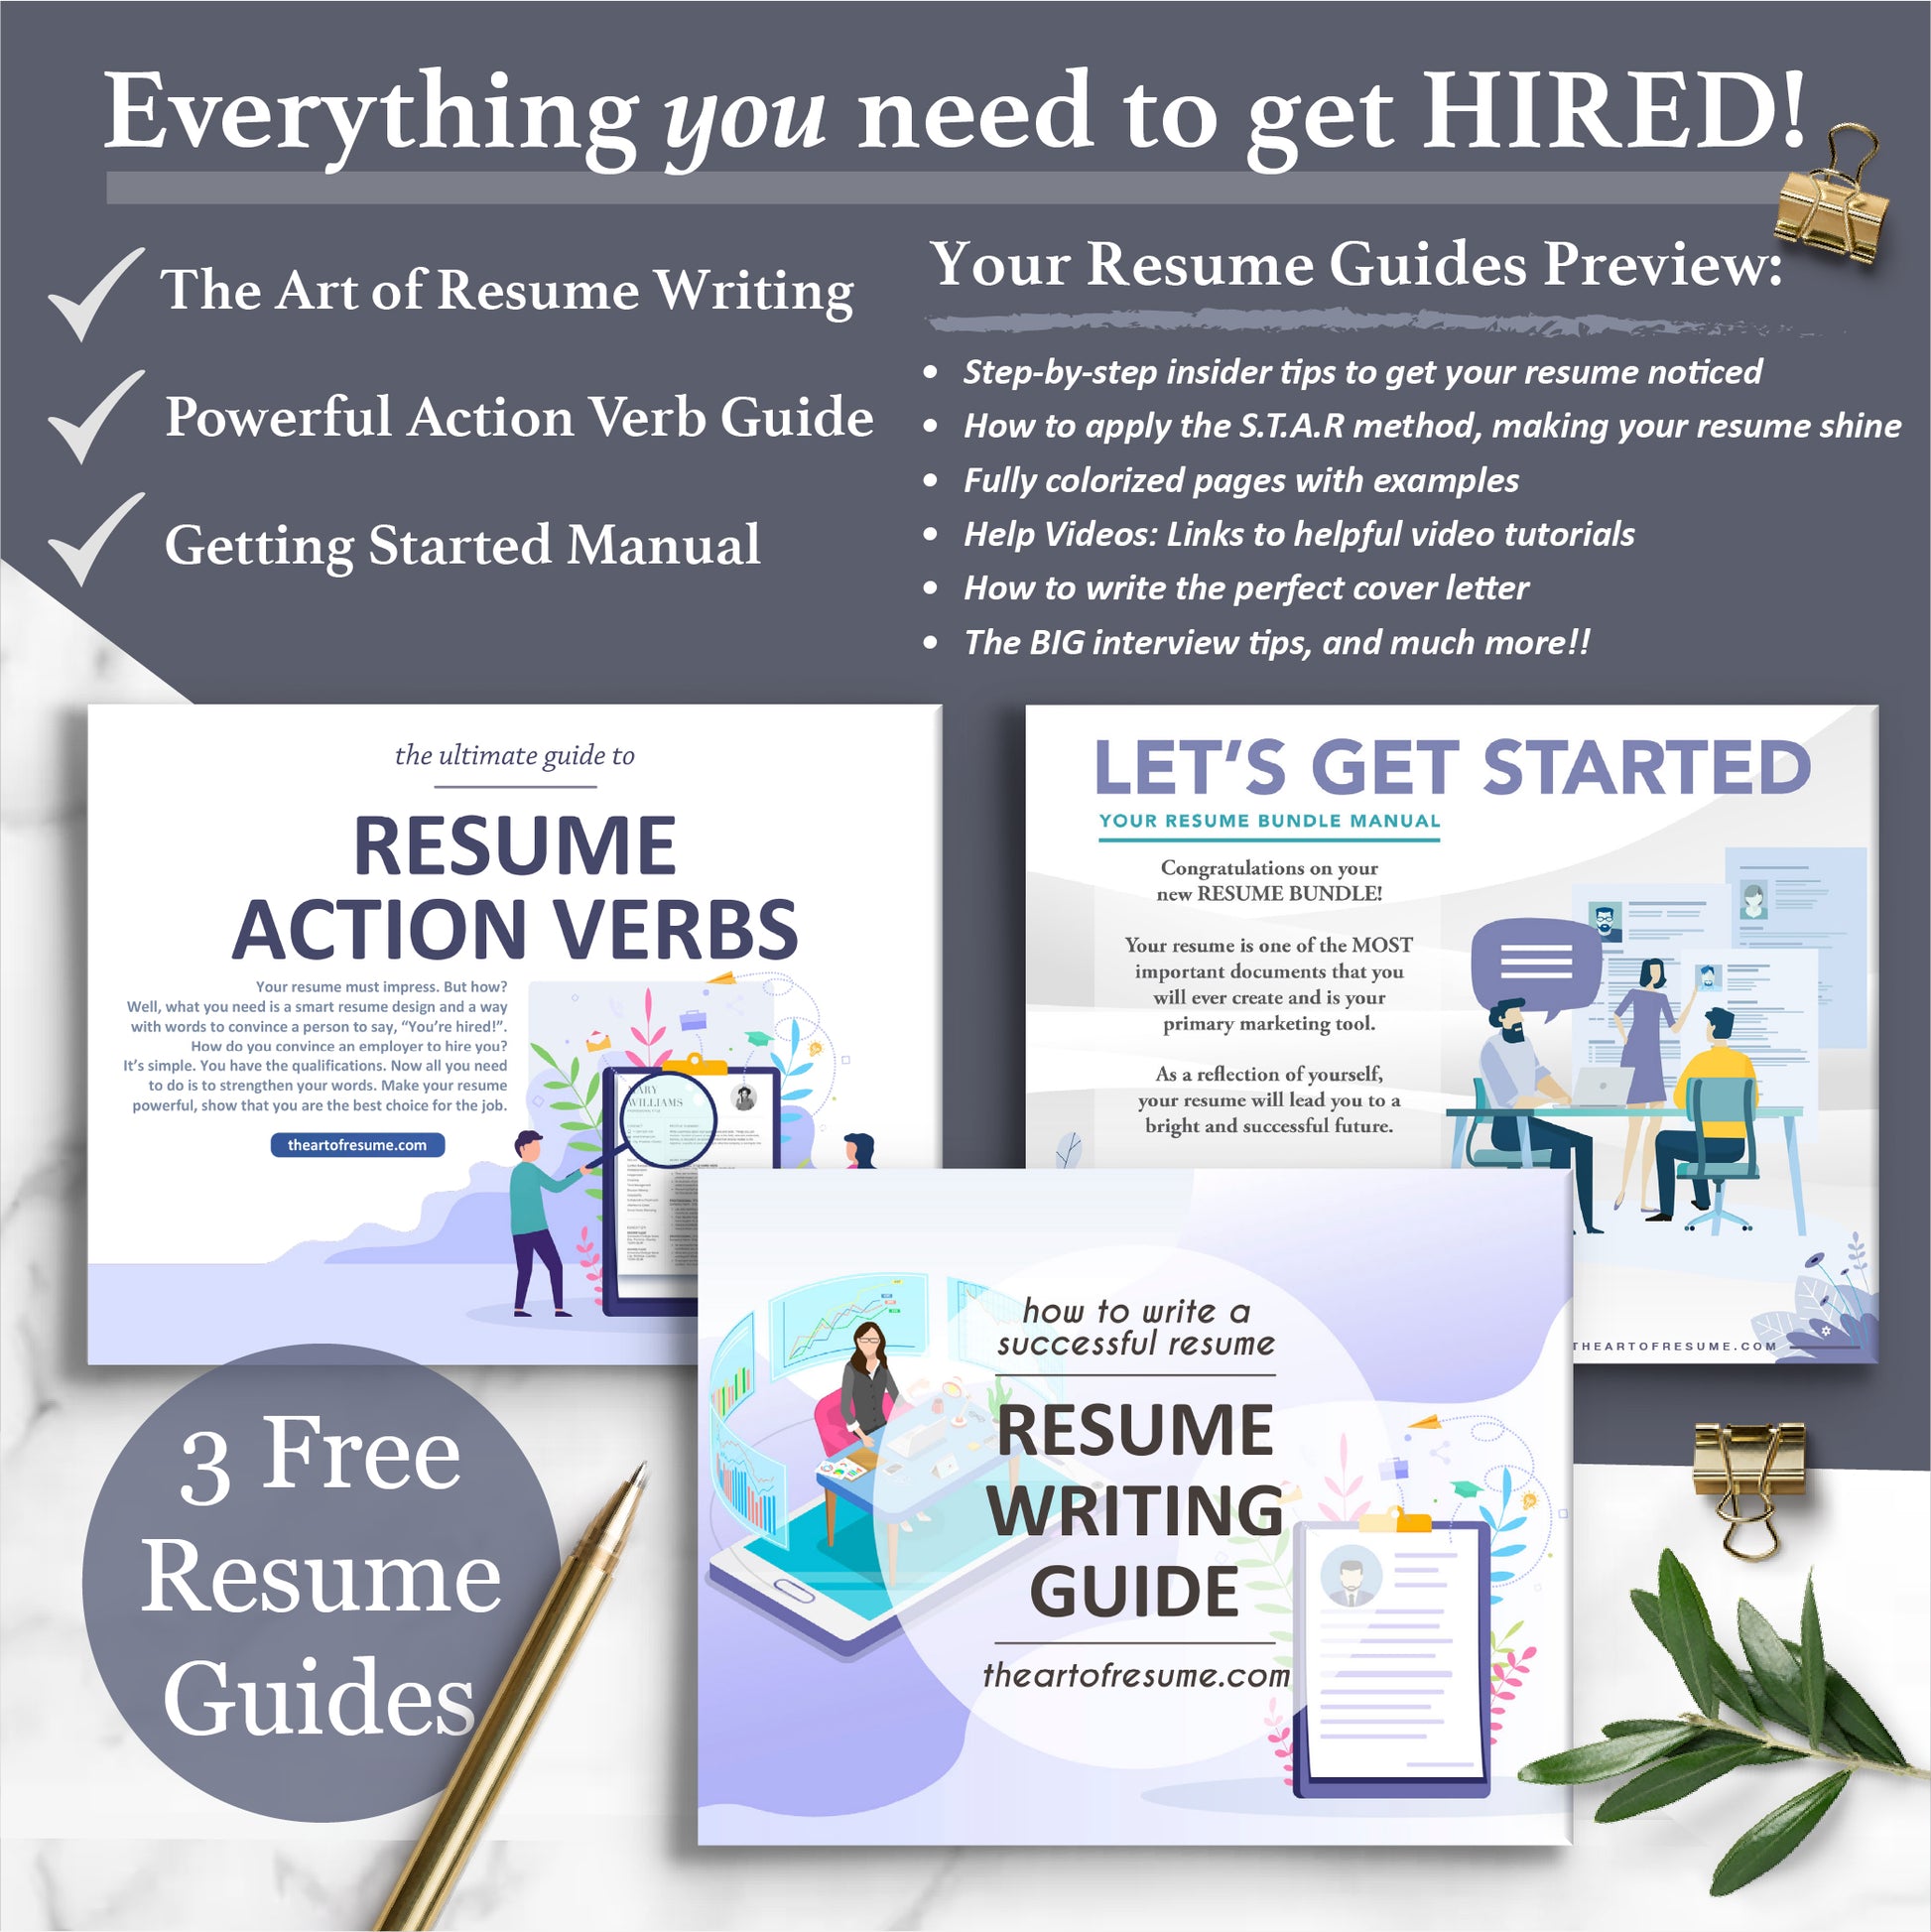 The Art of Resume | The Art of Resume Writing Guide, Action Verb Guide, Resume Instructional Manual